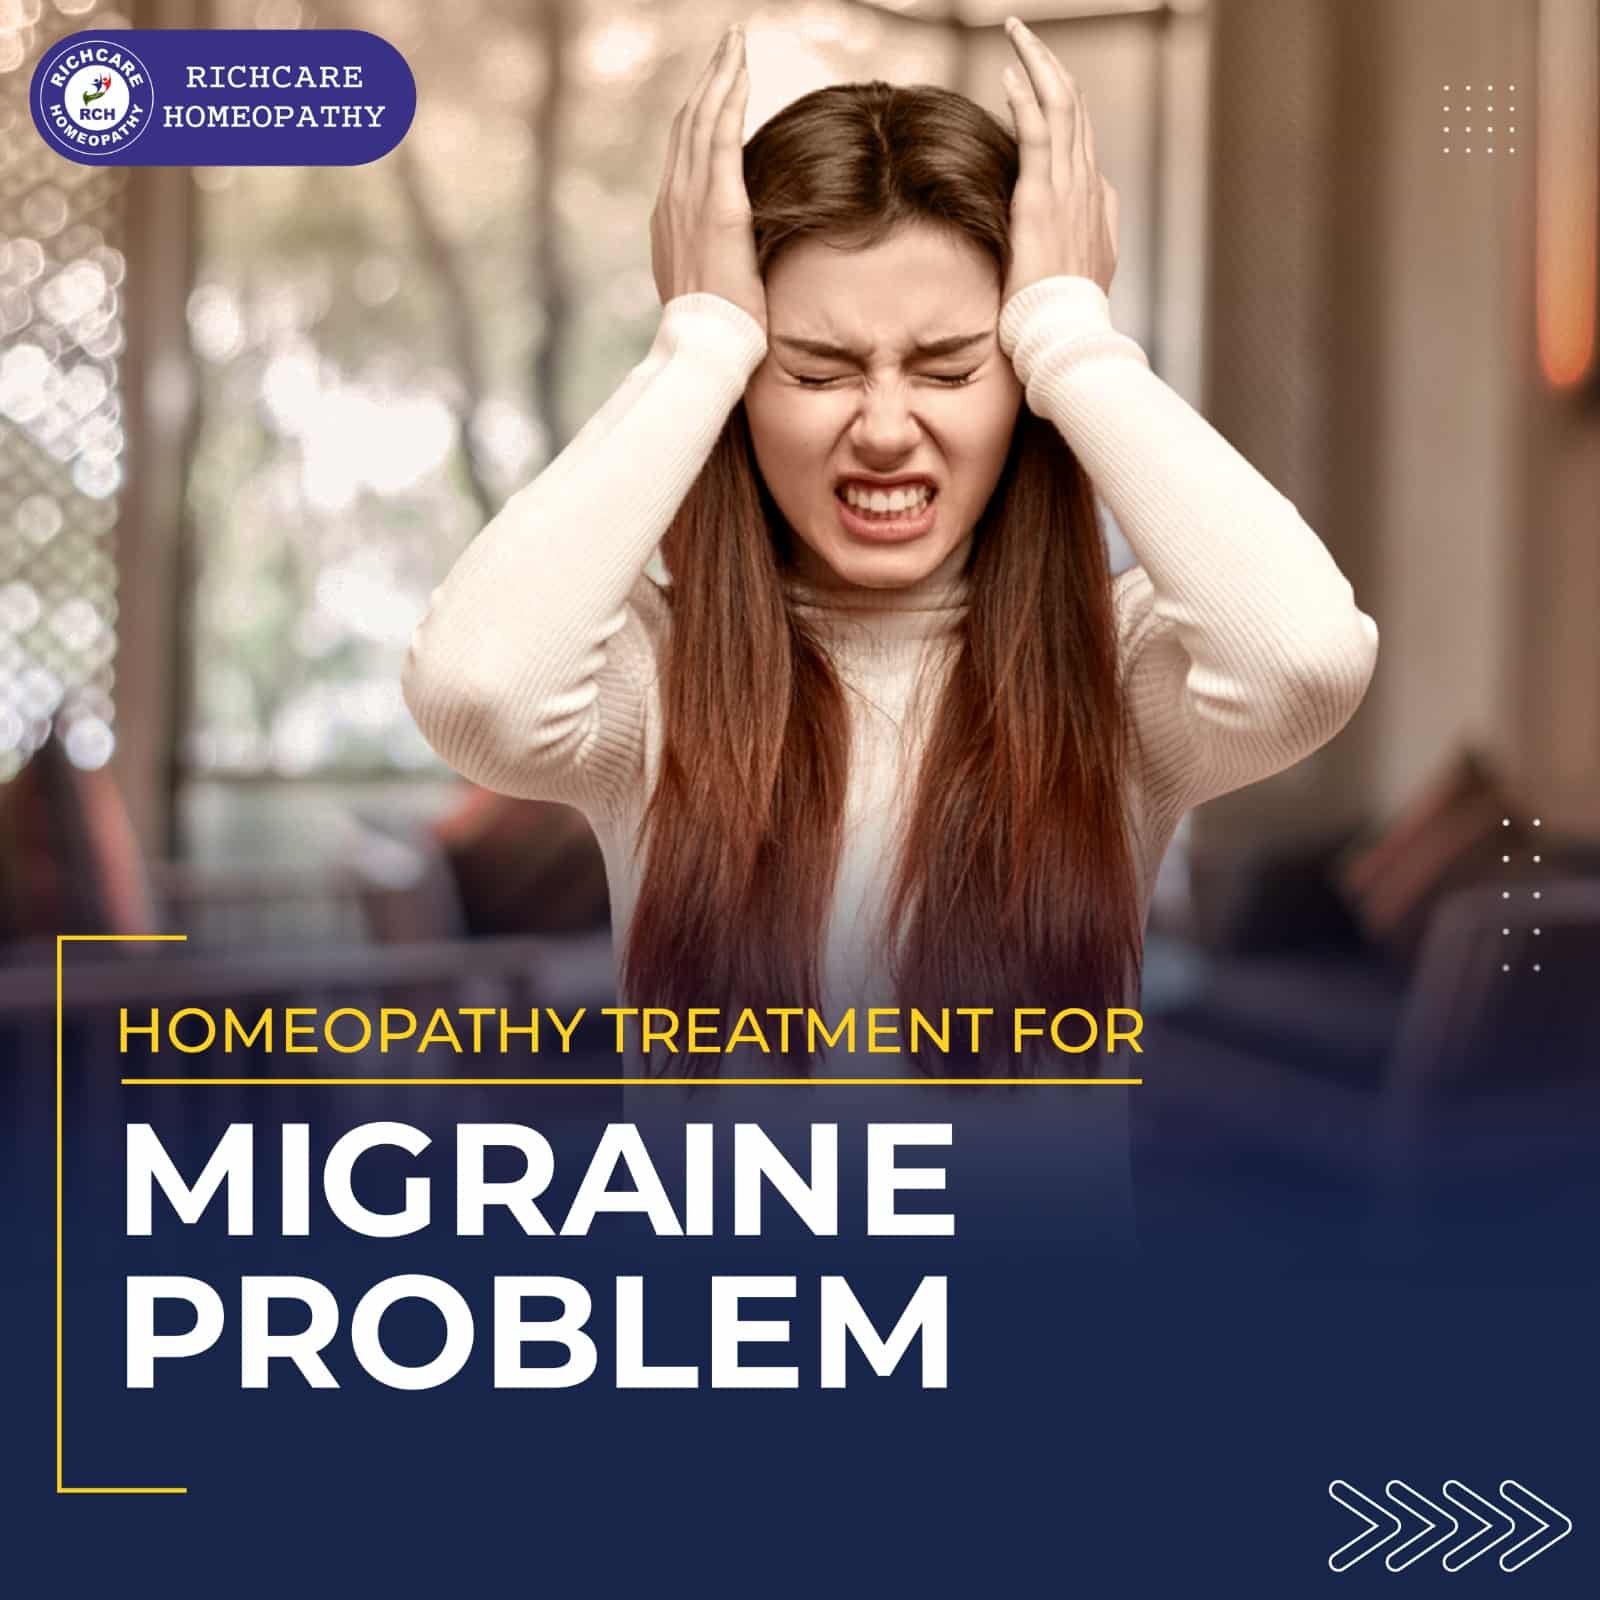 Migraine Homeopathy Treatments in Bangalore | Rich Care Homeopathy